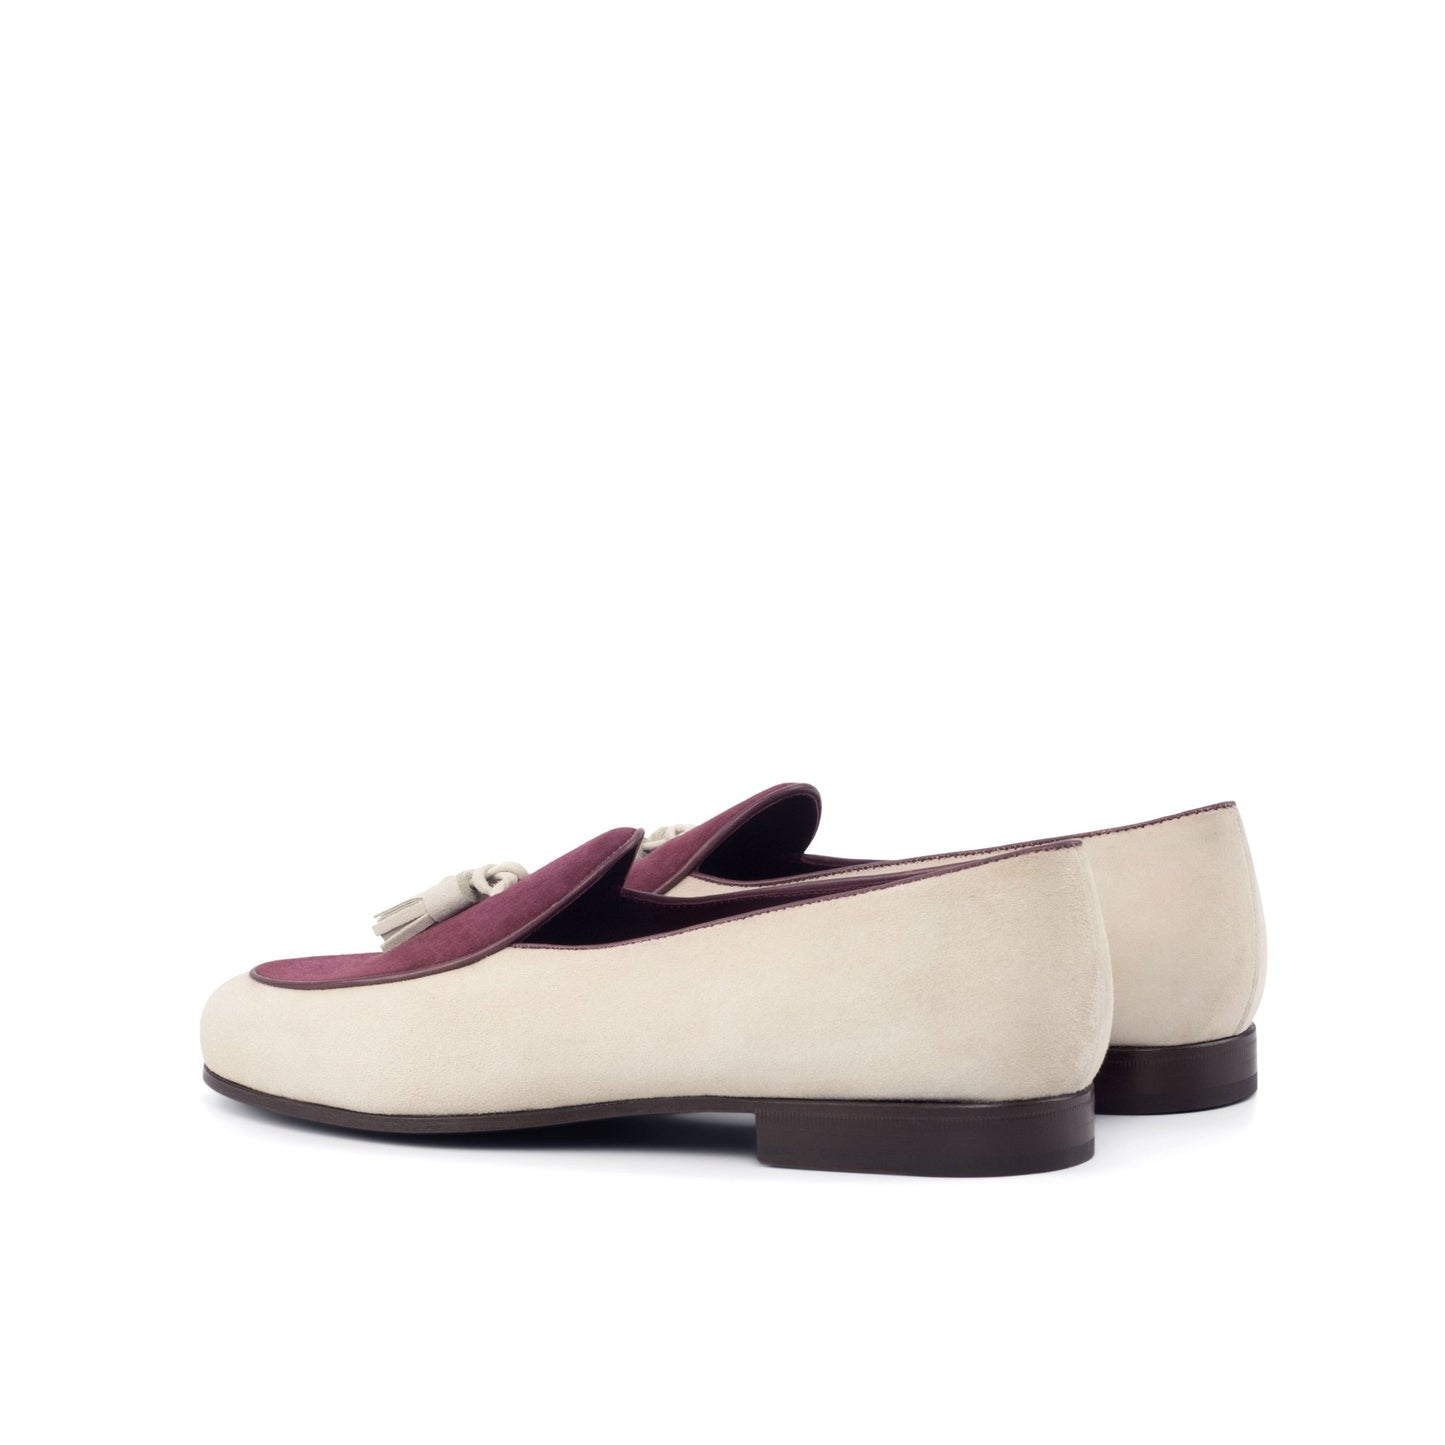 Belgian Slipper in Ivory Suede and Wine Suede - Zatorres | Free Shipping on orders over $200